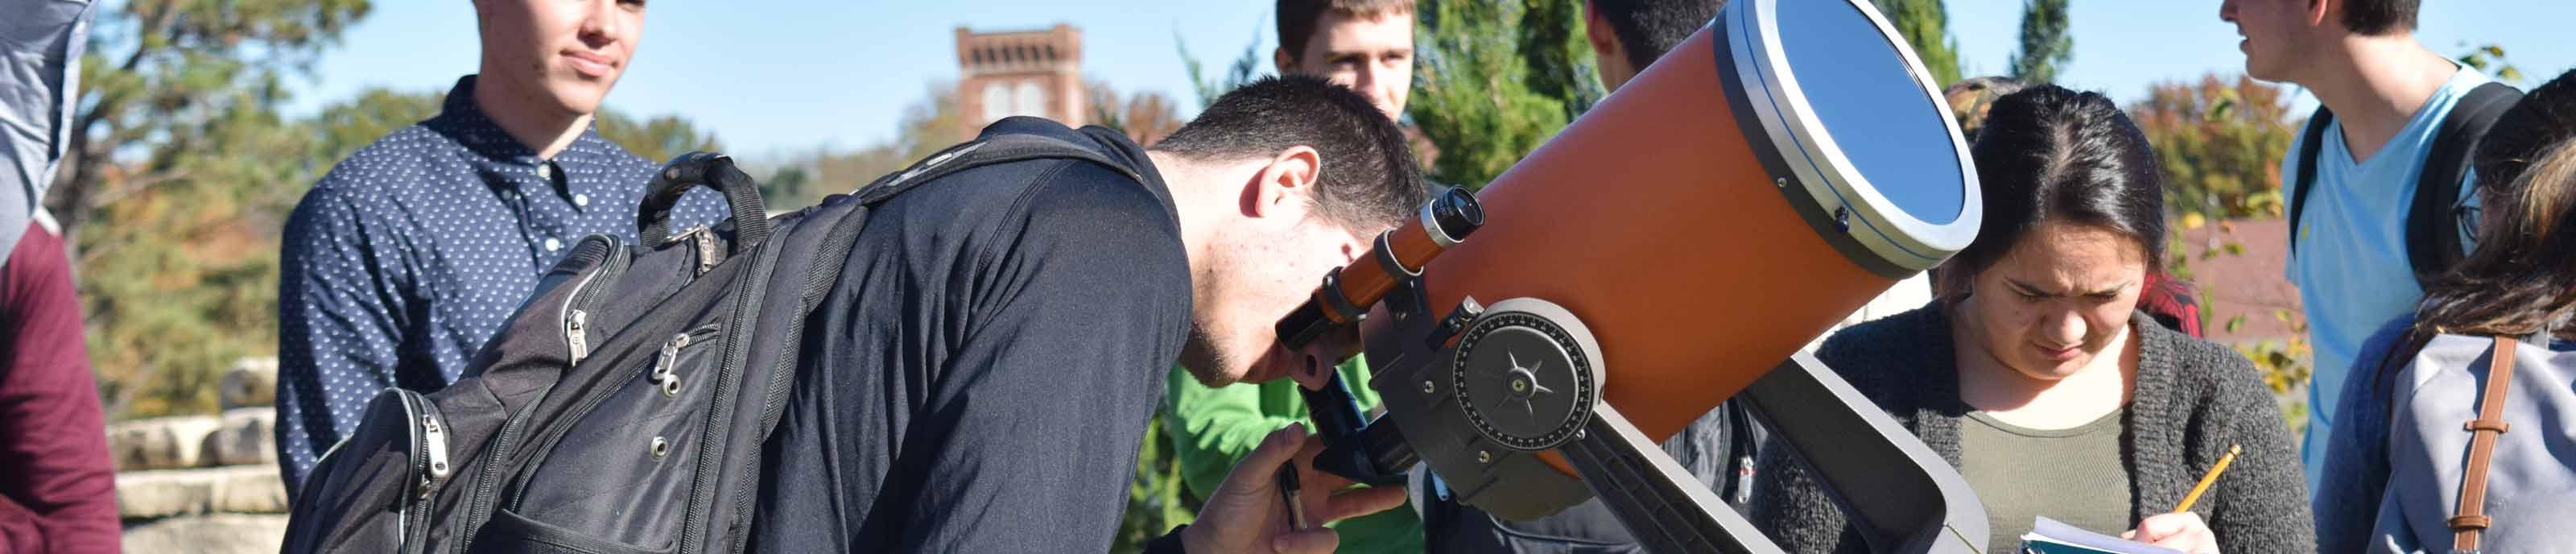 Students working with a telescope in Astronomy class